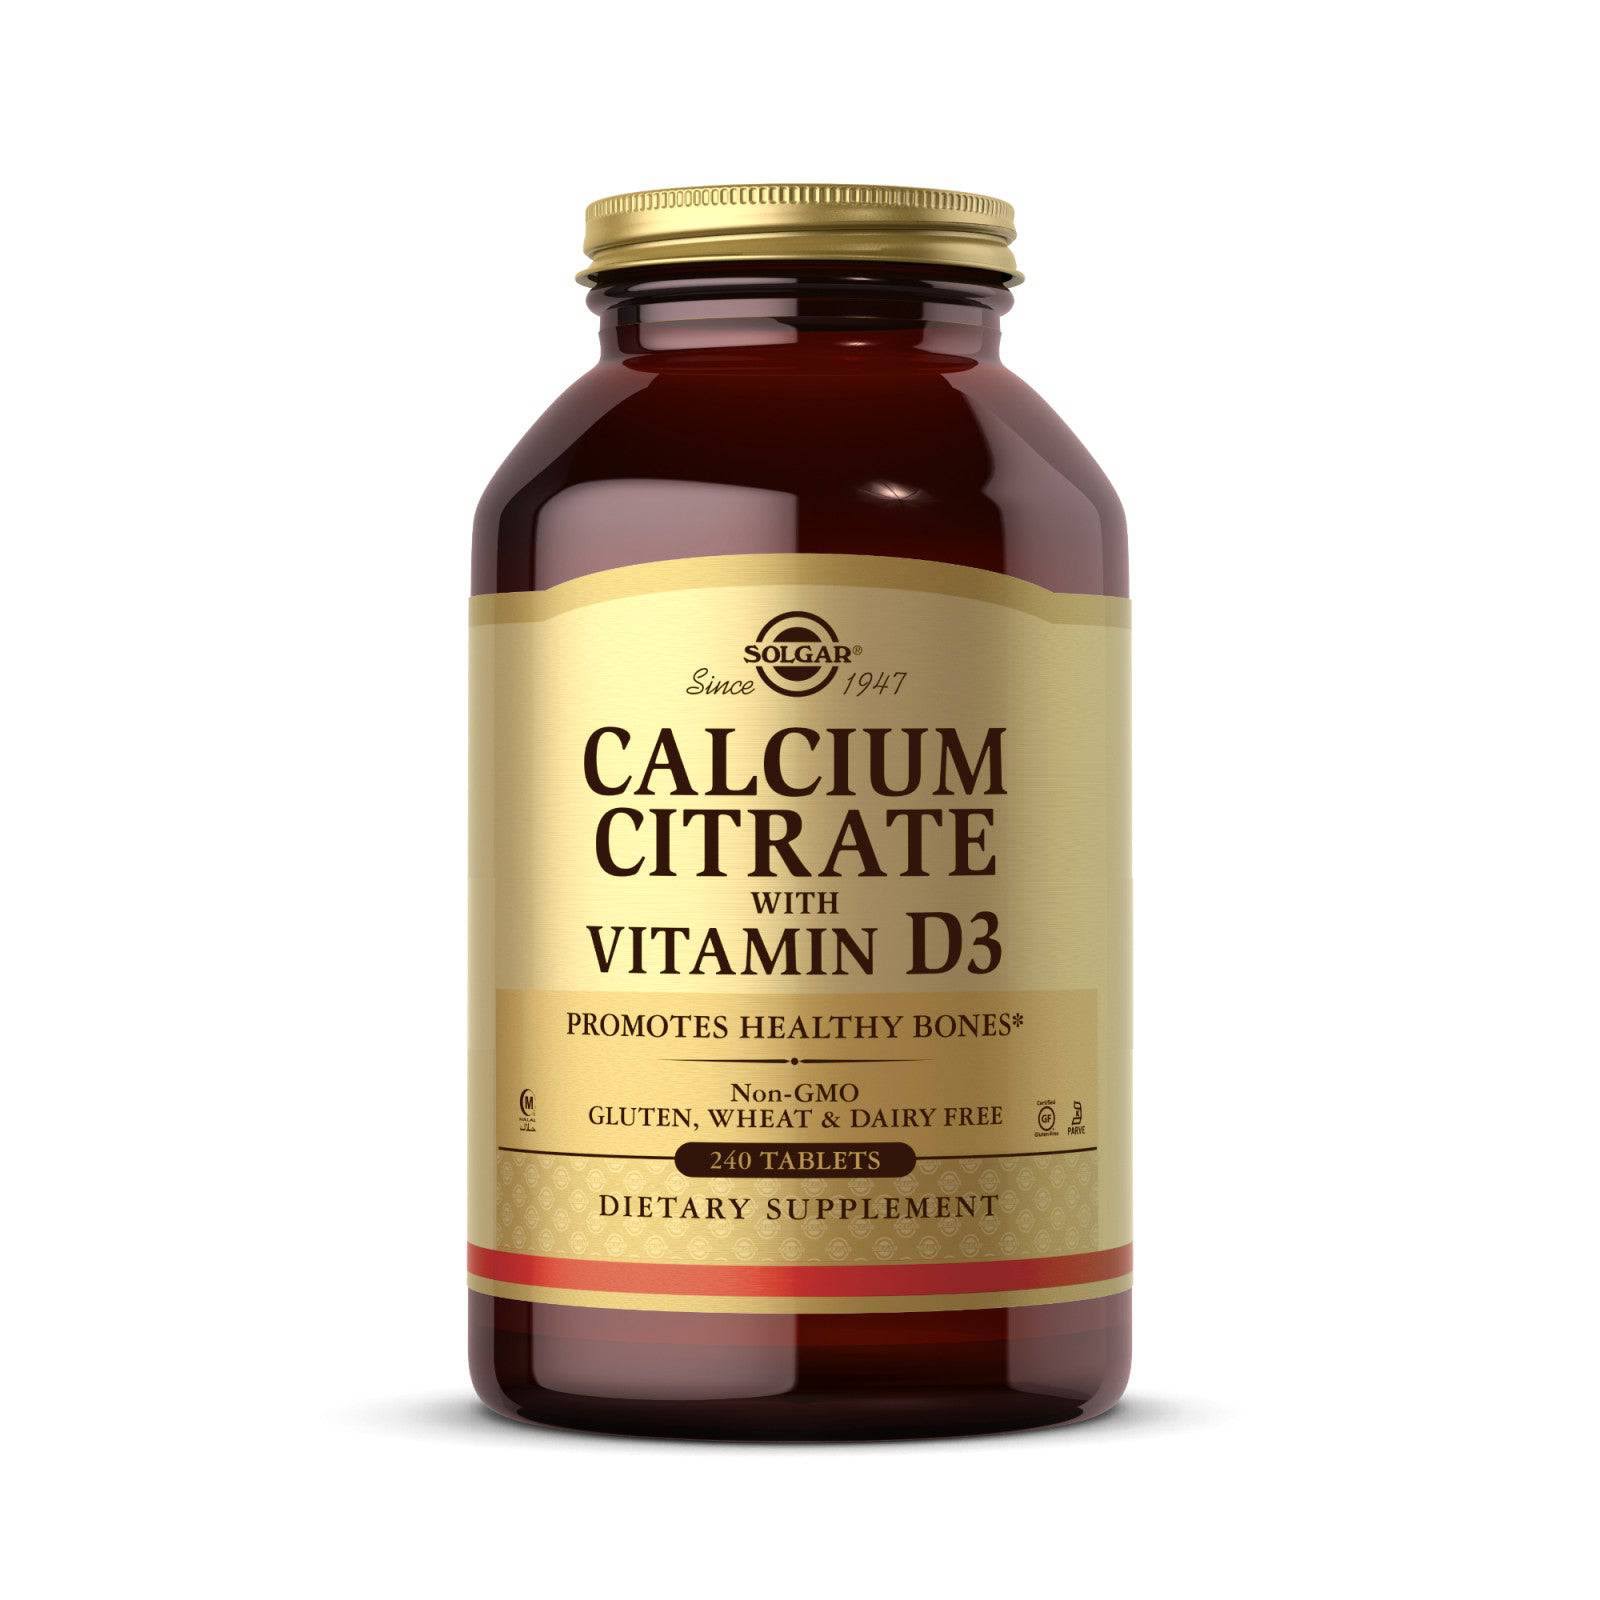 Solgar Calcium Citrate with Vitamin D3 Dietary Supplement - 240 Tablets